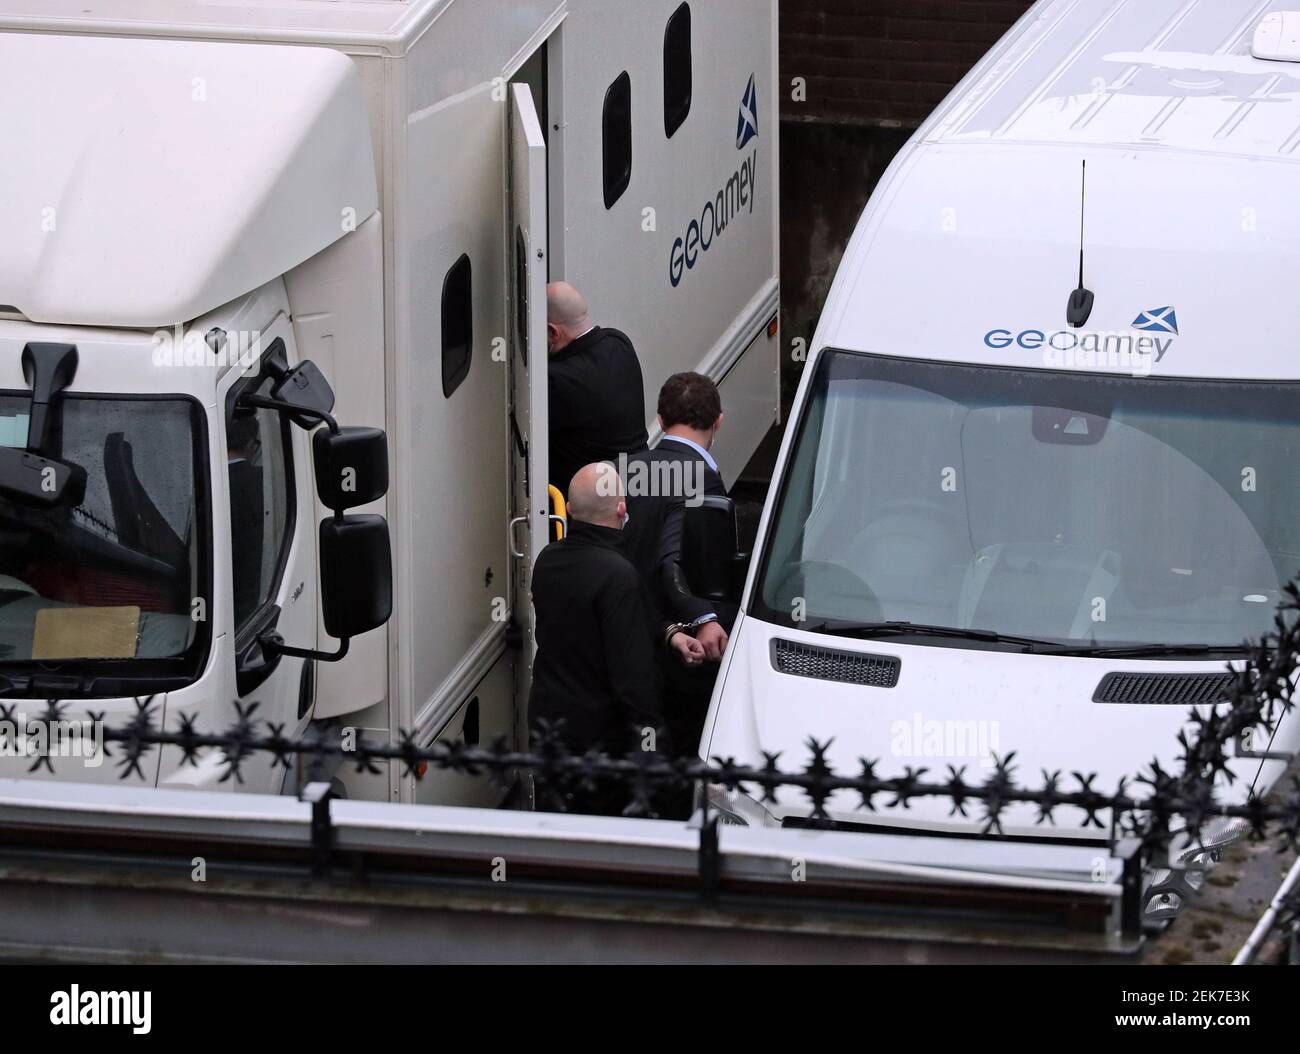 Simon Bowes-Lyon (centre), the Earl of Strathmore, is escorted in handcuffs into a prison van at Dundee Sheriff Court. Bowes-Lyon, 34, has been jailed for 10 months for sexually assaulting a woman in a bedroom at his ancestral home, Glamis Castle in Angus. Picture date: Tuesday February 23, 2021. Stock Photo